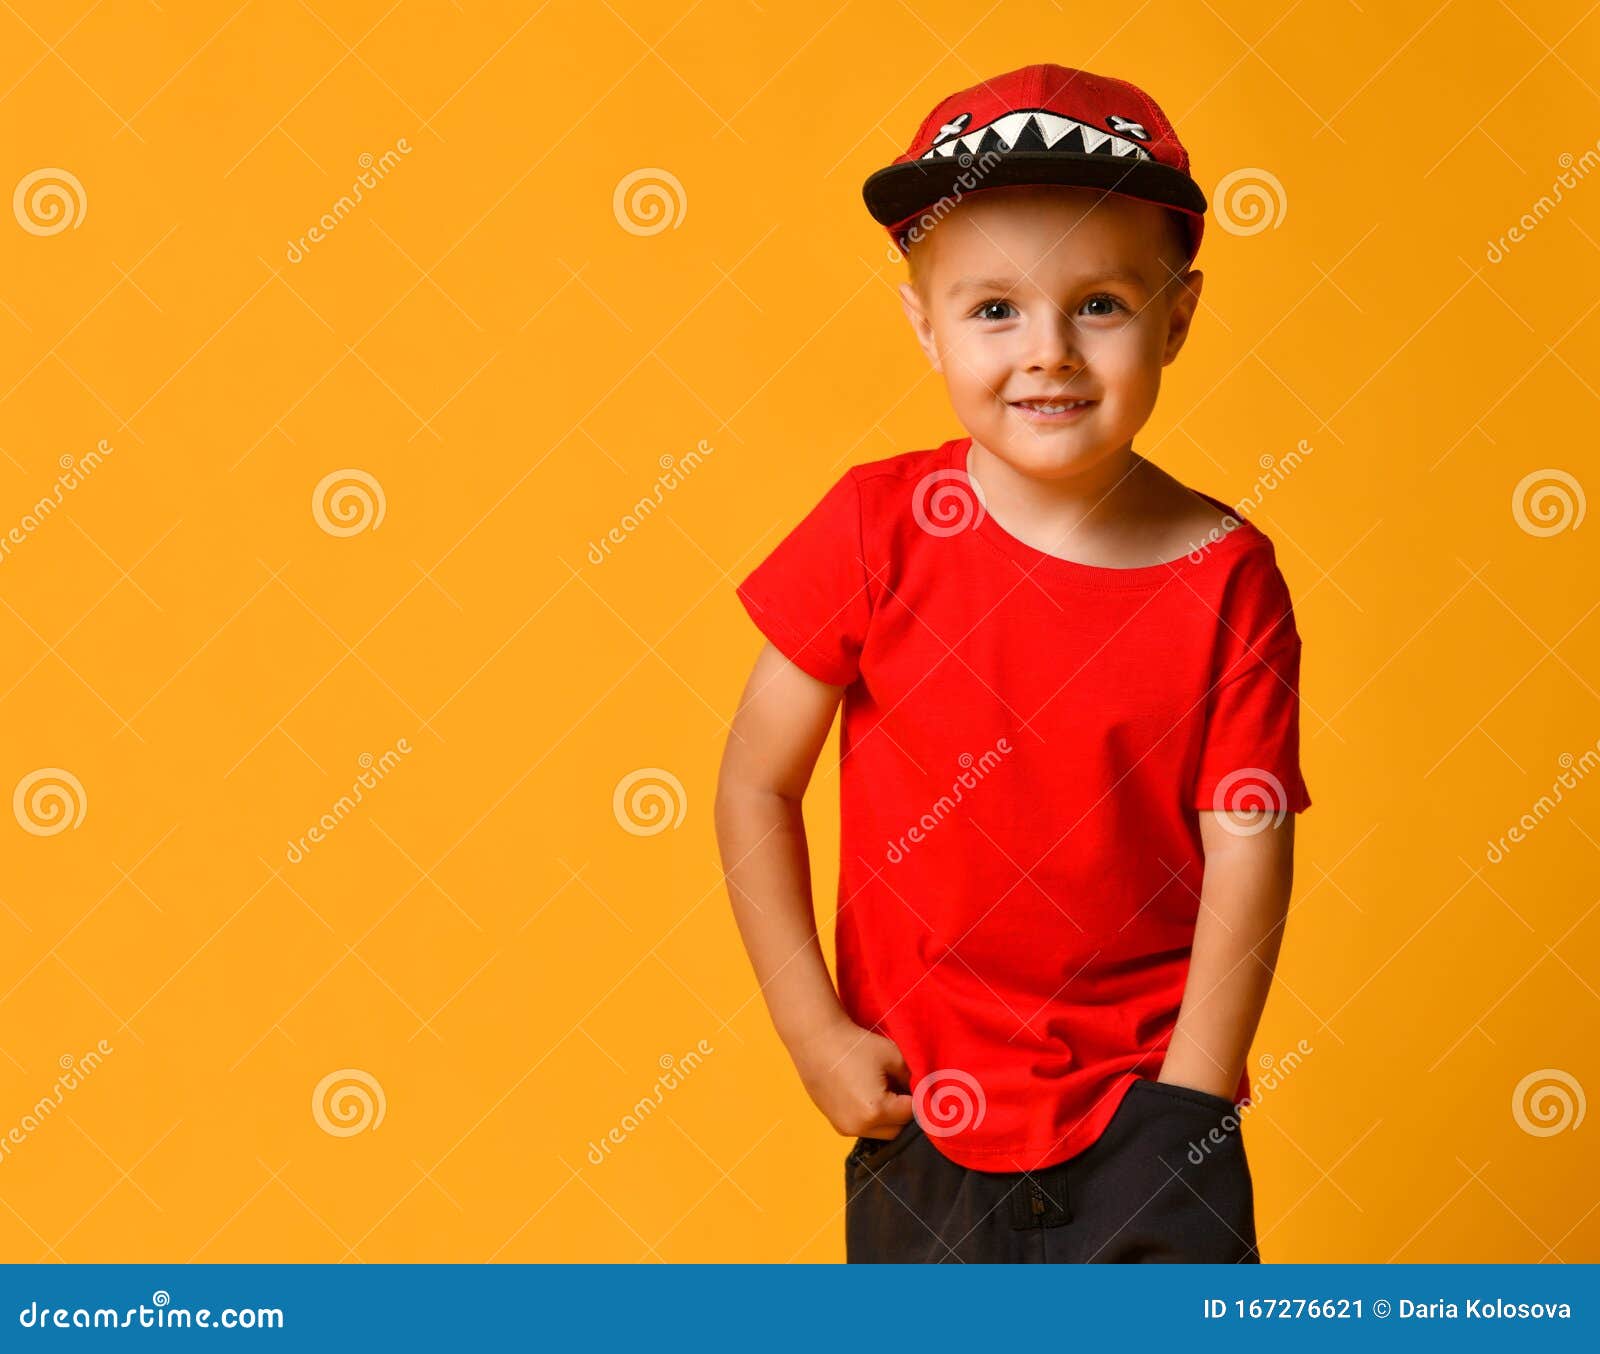 Young Boy in a Red T-shirt and Dark Pants, White Sneakers and a Cap Posing on a Copy Space on a Yellow Background Stock Image - of contemporary,